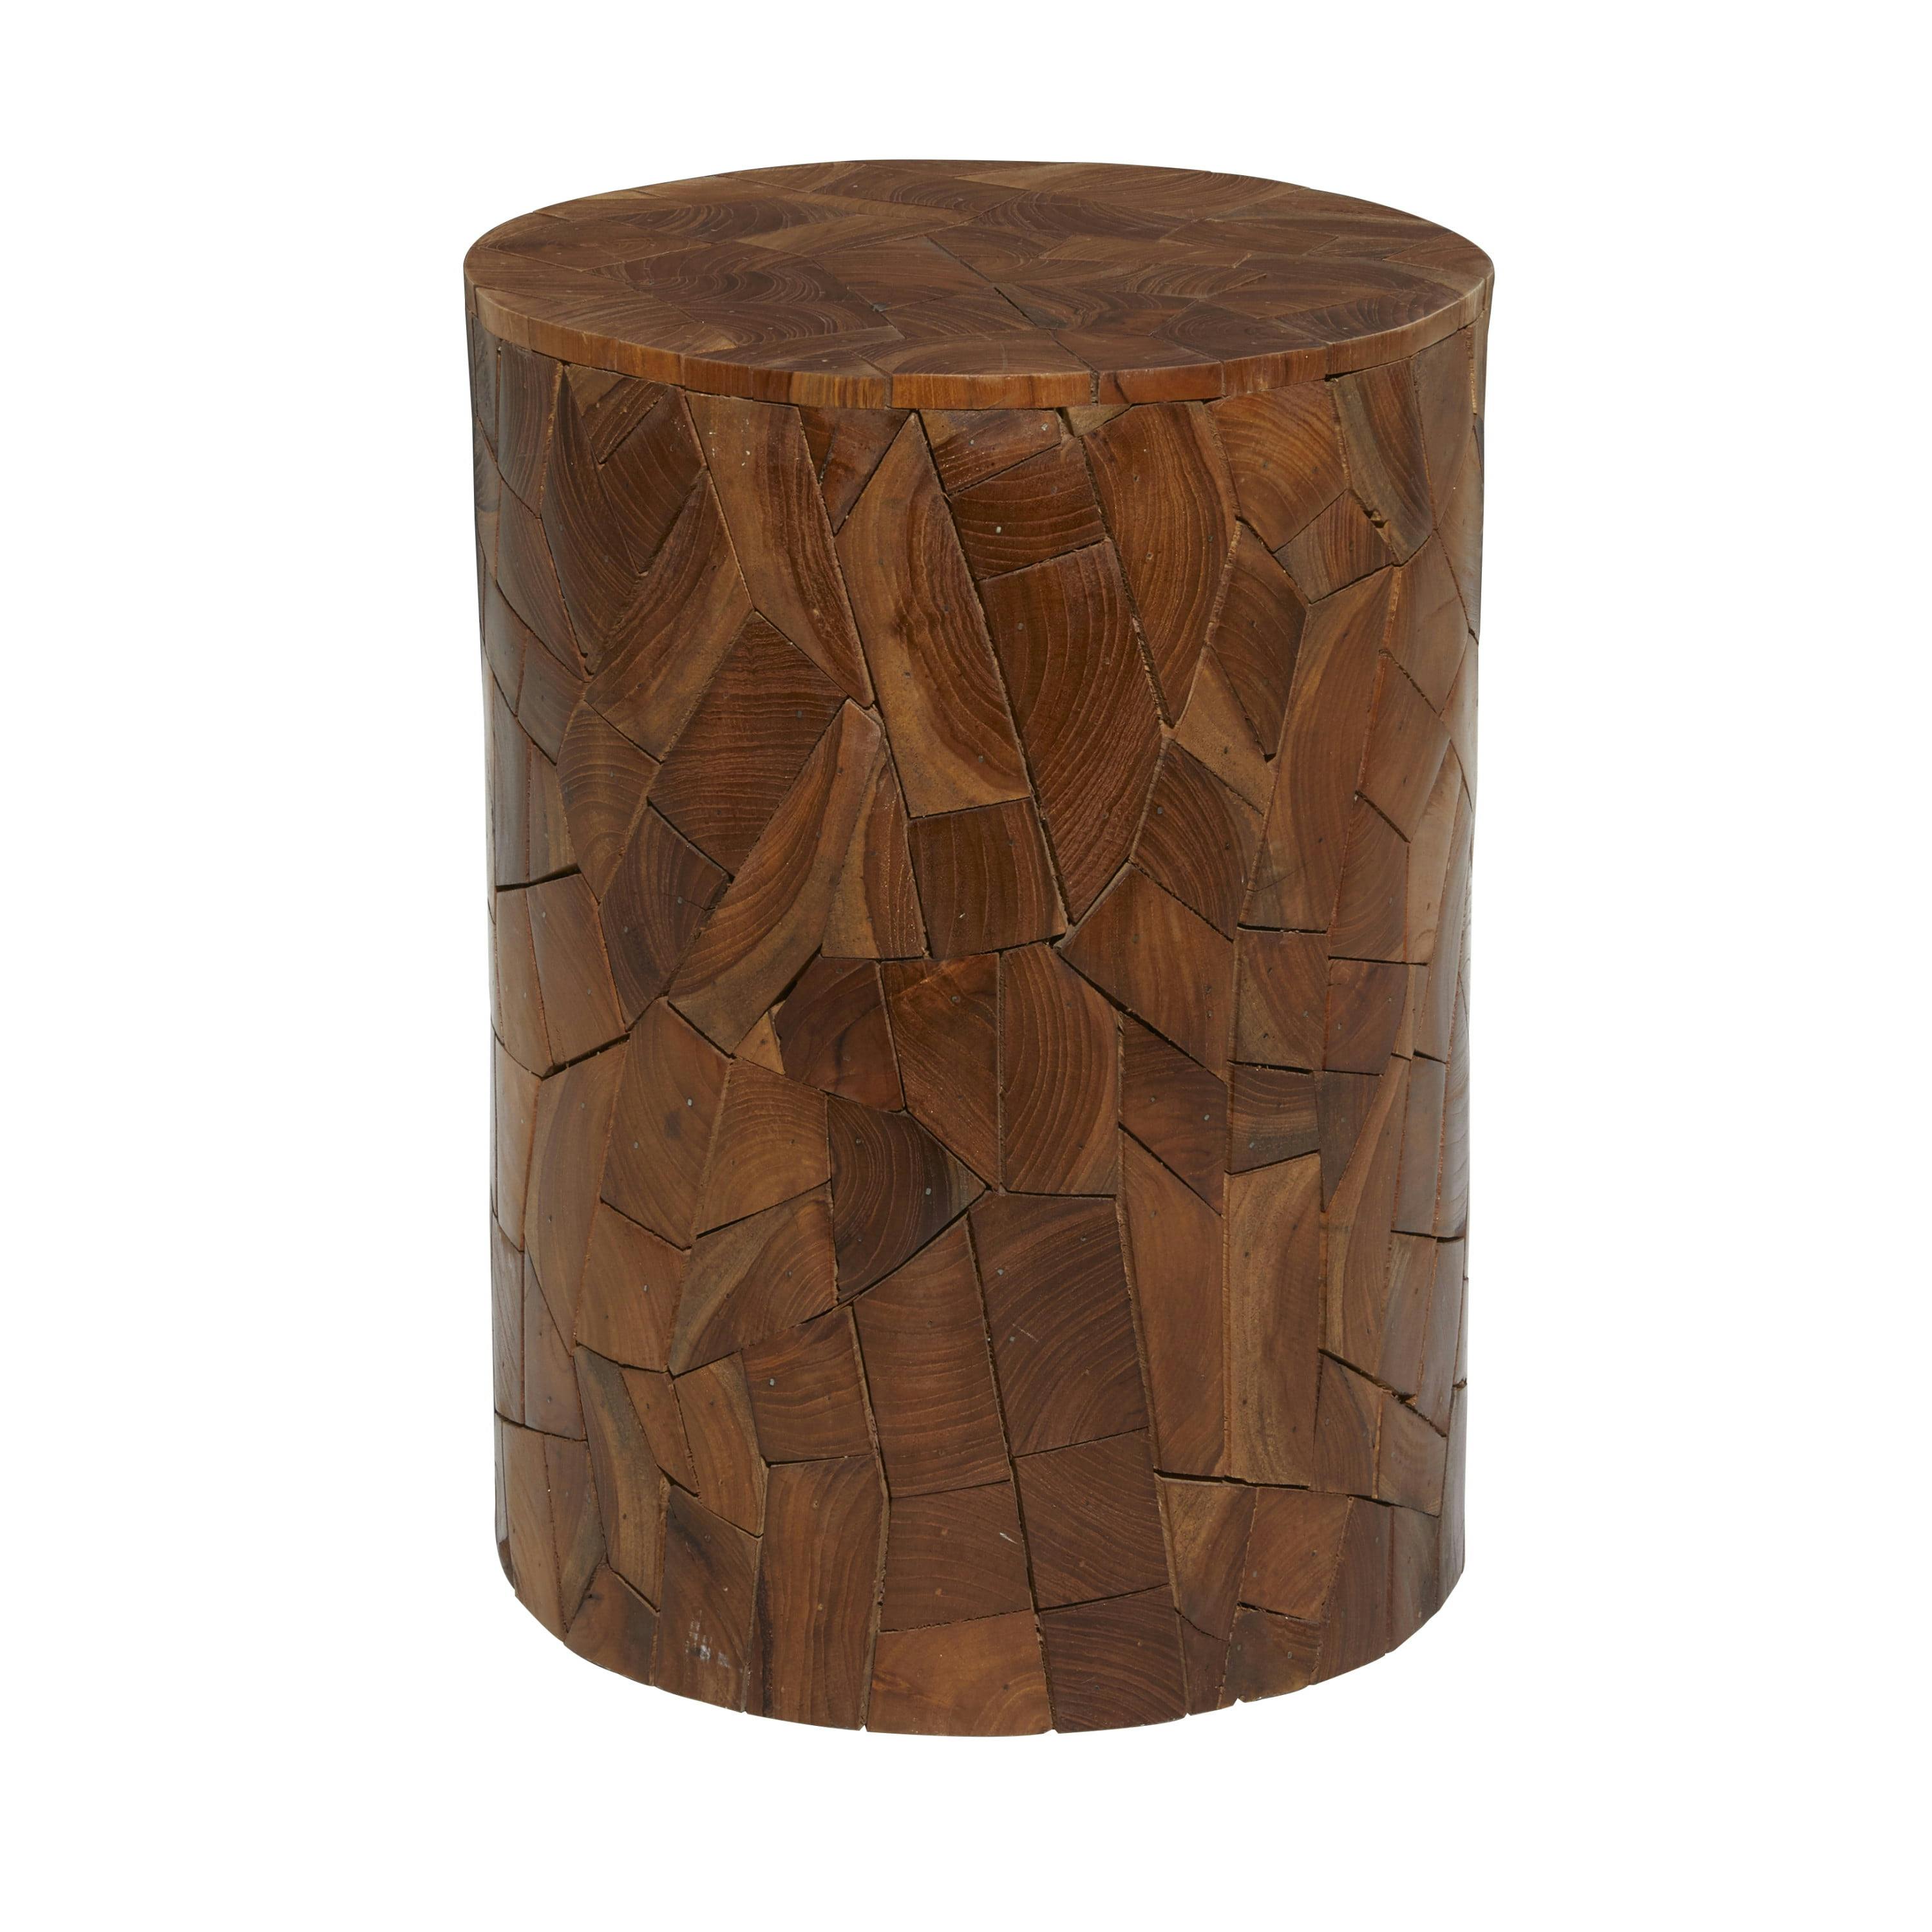 Eco Chic Teak Mosaic 12" Round Handcrafted Accent Table